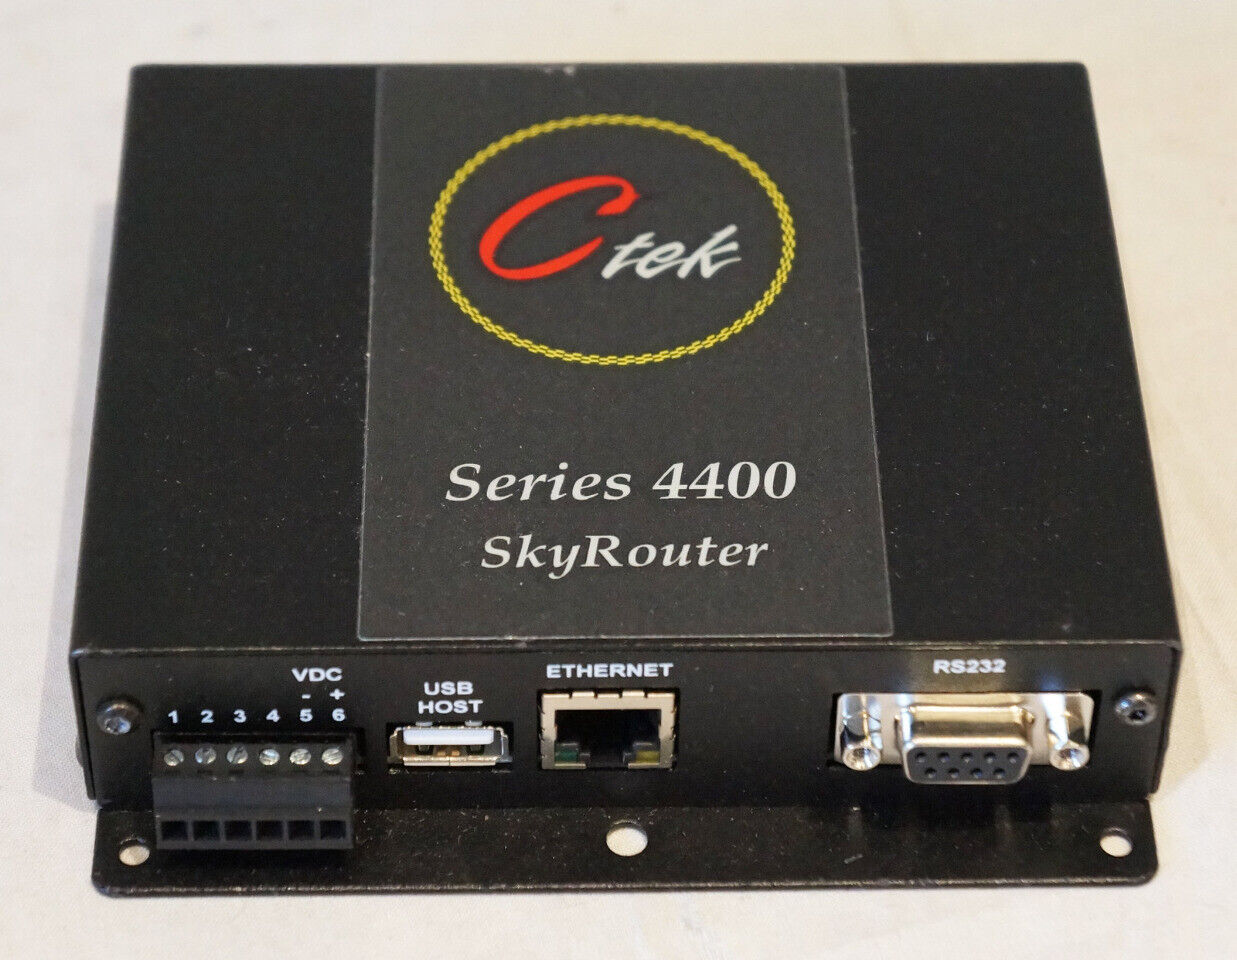 CTEK Z4400006 SKYROUTER / CELLULAR ROUTER SERIES 4400 Z4400 WITH GPS